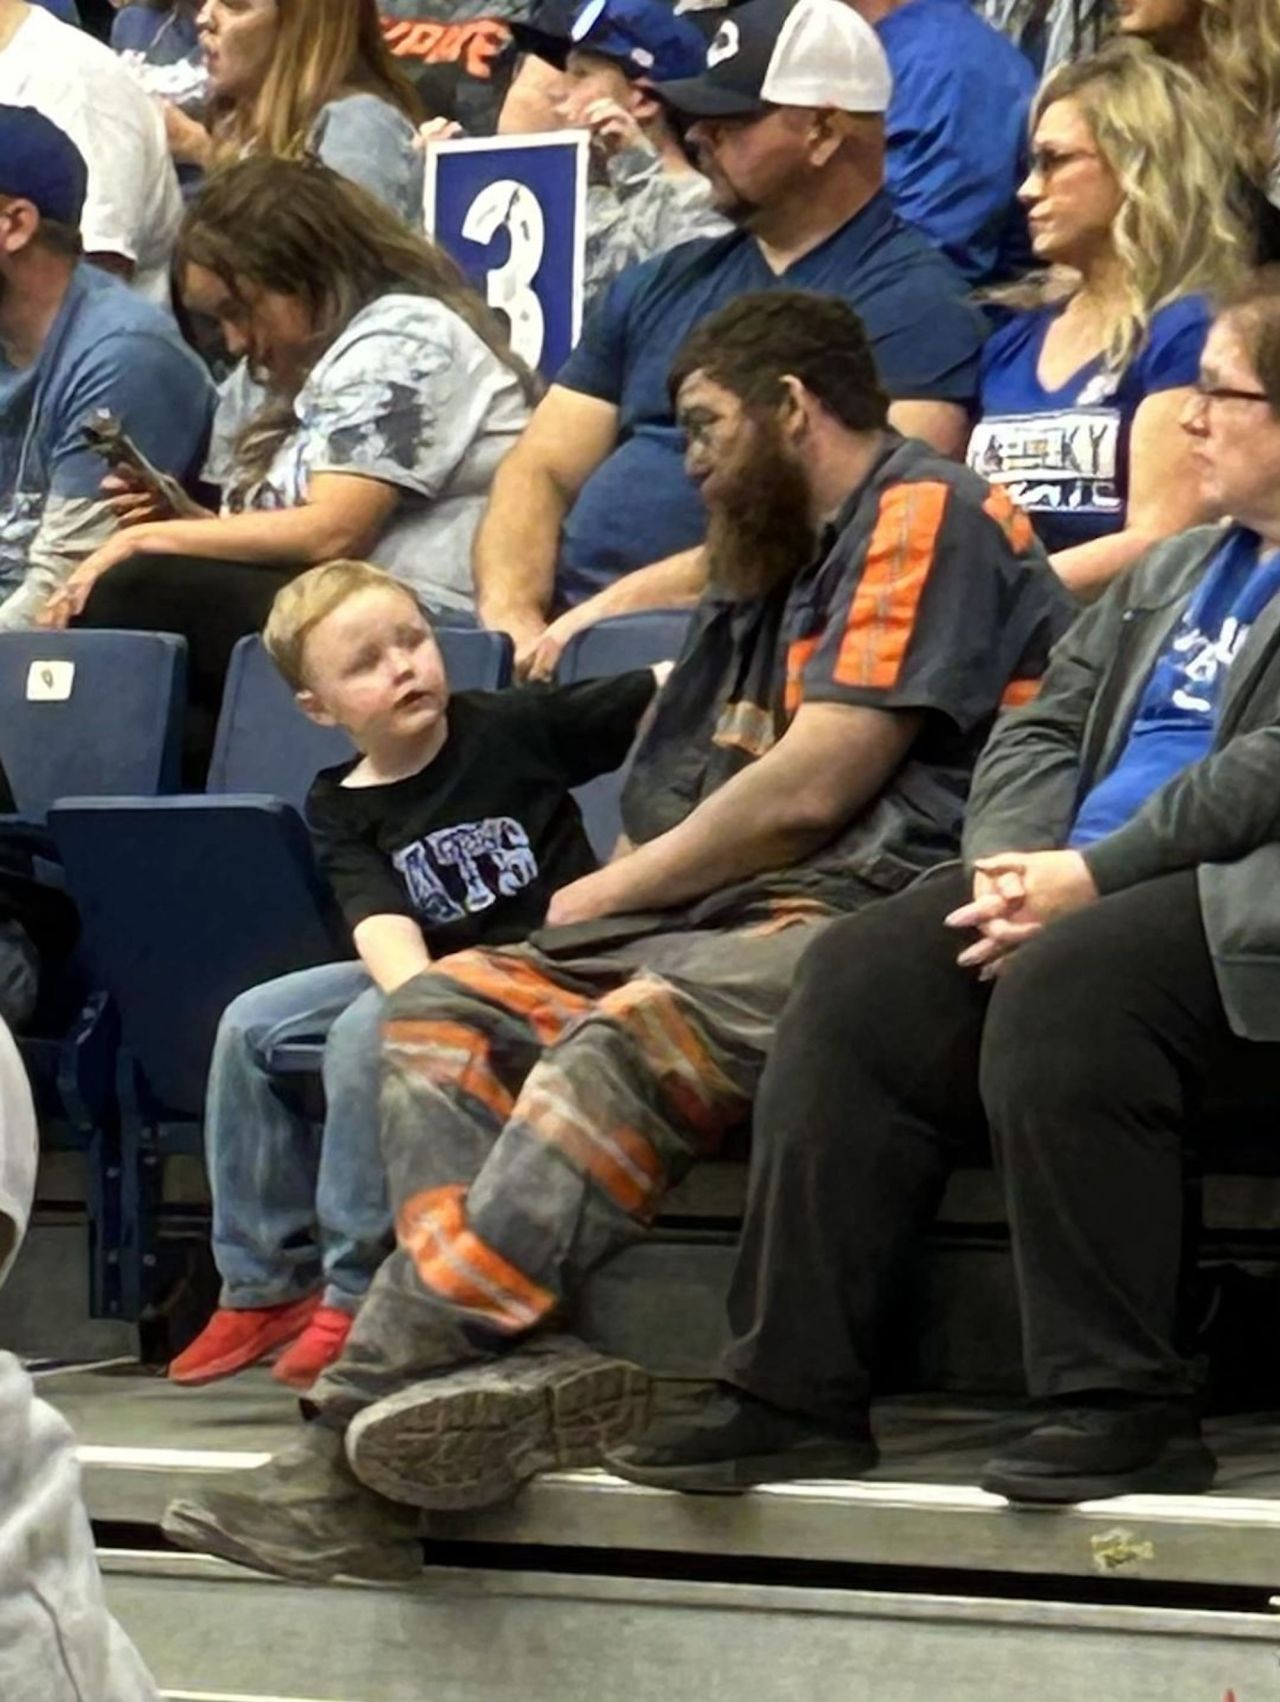 Coal miner Michael McGuire sits with his son Easton at a University of Kentucky basketball scrimmage that was played in Pikeville, Kentucky, on Saturday, October 22. <a href="https://www.cnn.com/2022/10/26/us/kentucky-wildcats-coach-john-calipari-coal-miner-son-game" target="_blank">The photo went viral</a> after Kentucky head coach John Calipari tweeted it. McGuire told CNN affiliate WKYT that he only had about 45 minutes to get to the game when he got off work and he didn't want to miss his son's first basketball experience. He later got to talk with Calipari, who invited him and his family to a VIP experience at the team's home arena in Lexington.